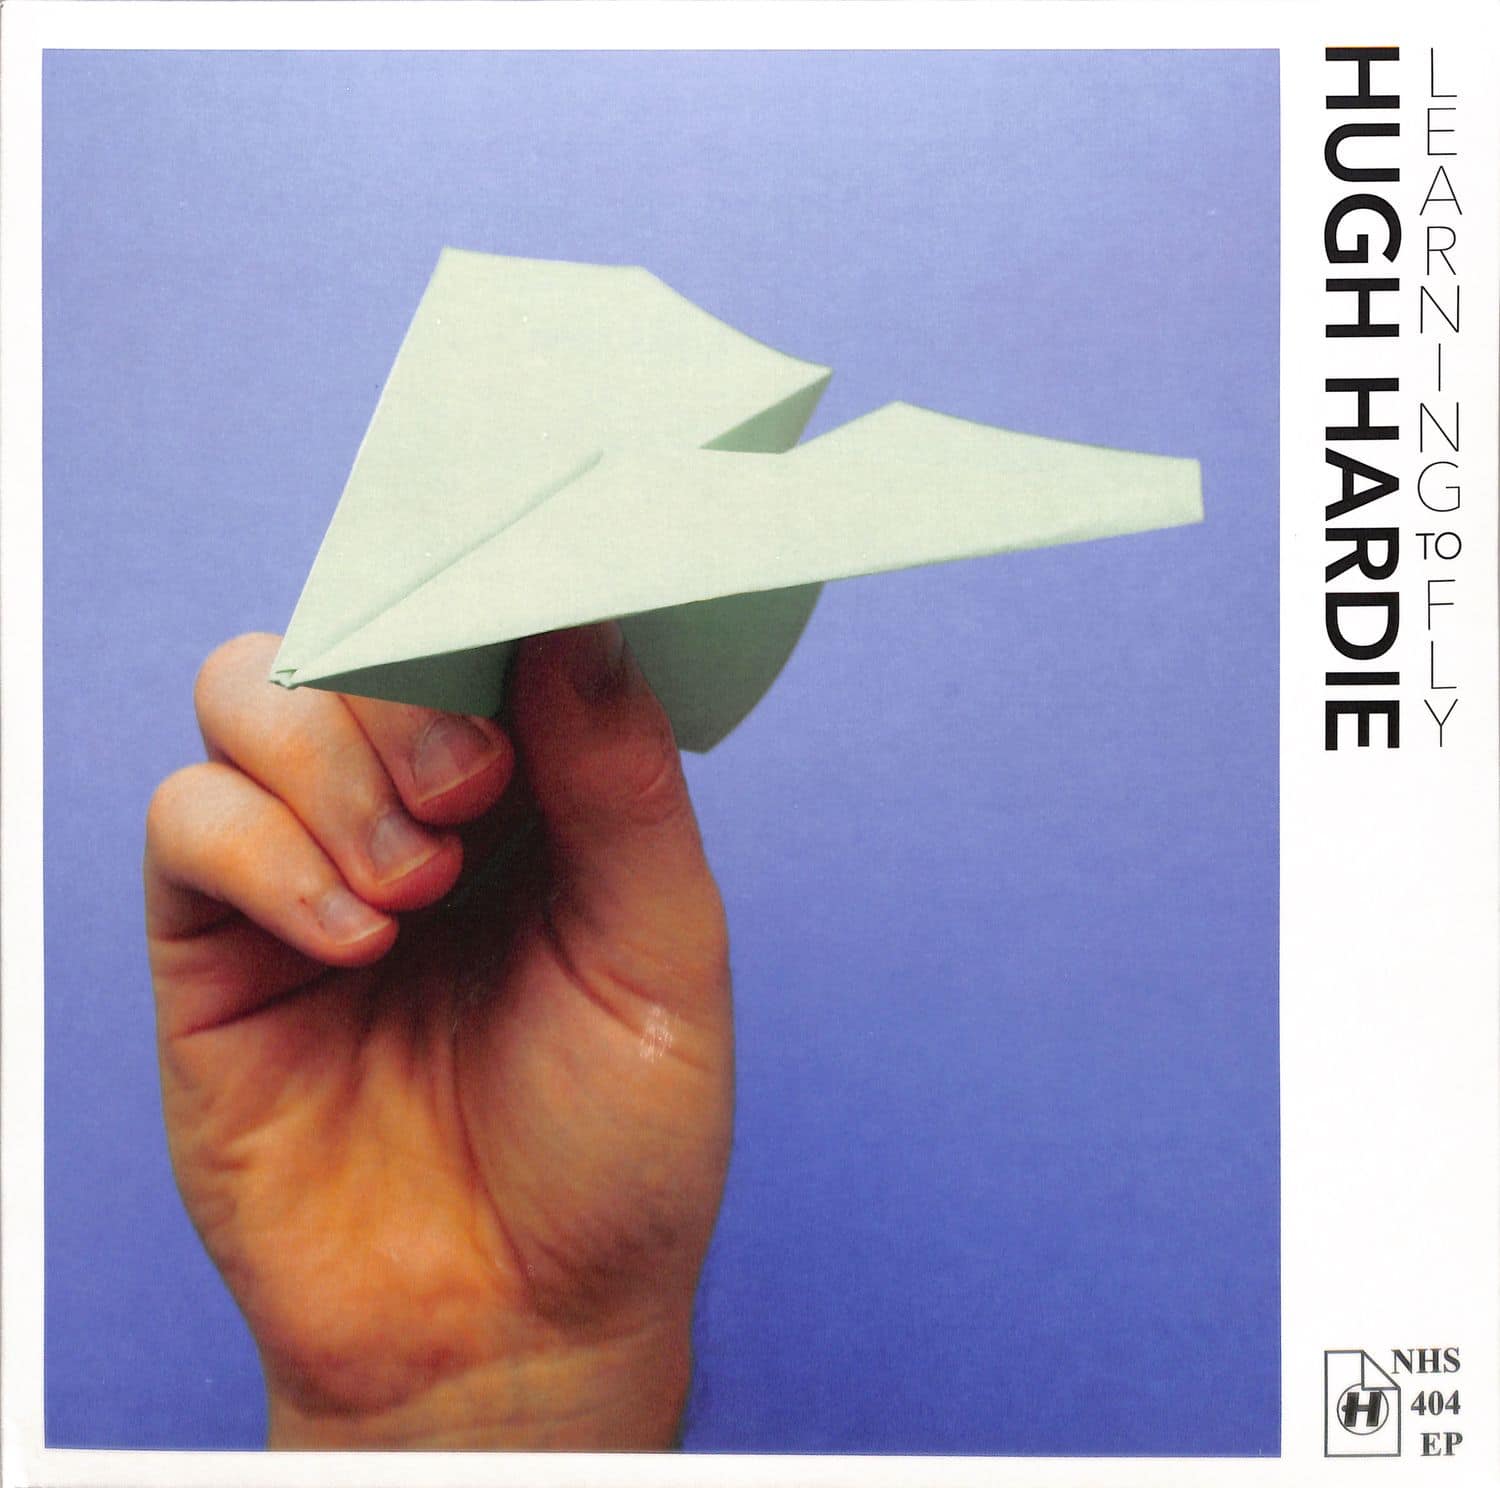 Hugh Hardie - LEARNING TO FLY